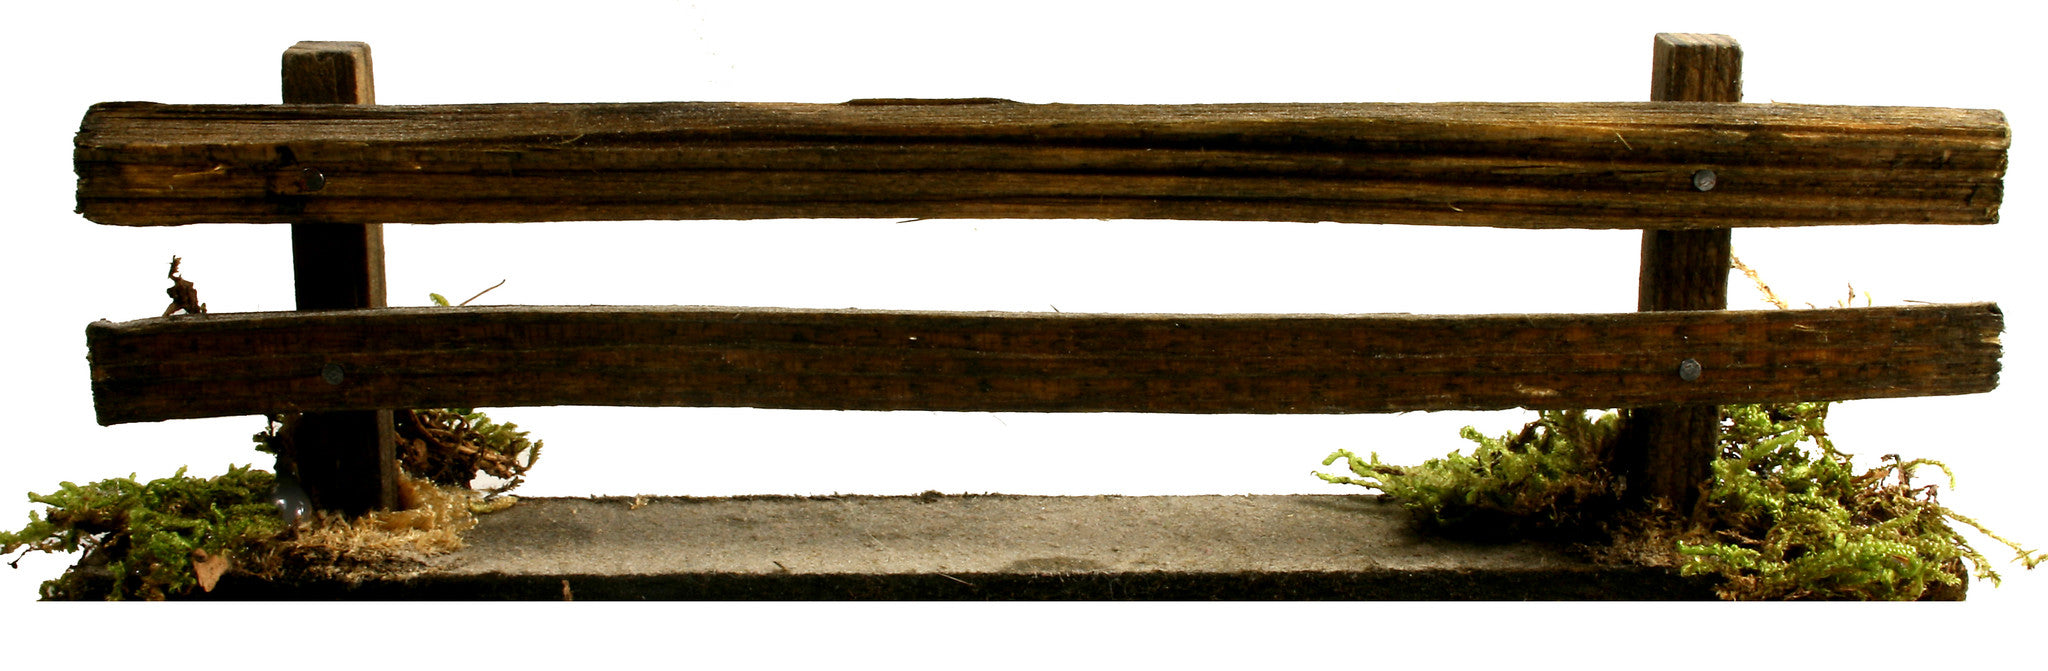 Wooden Fence - 6-1/2" long